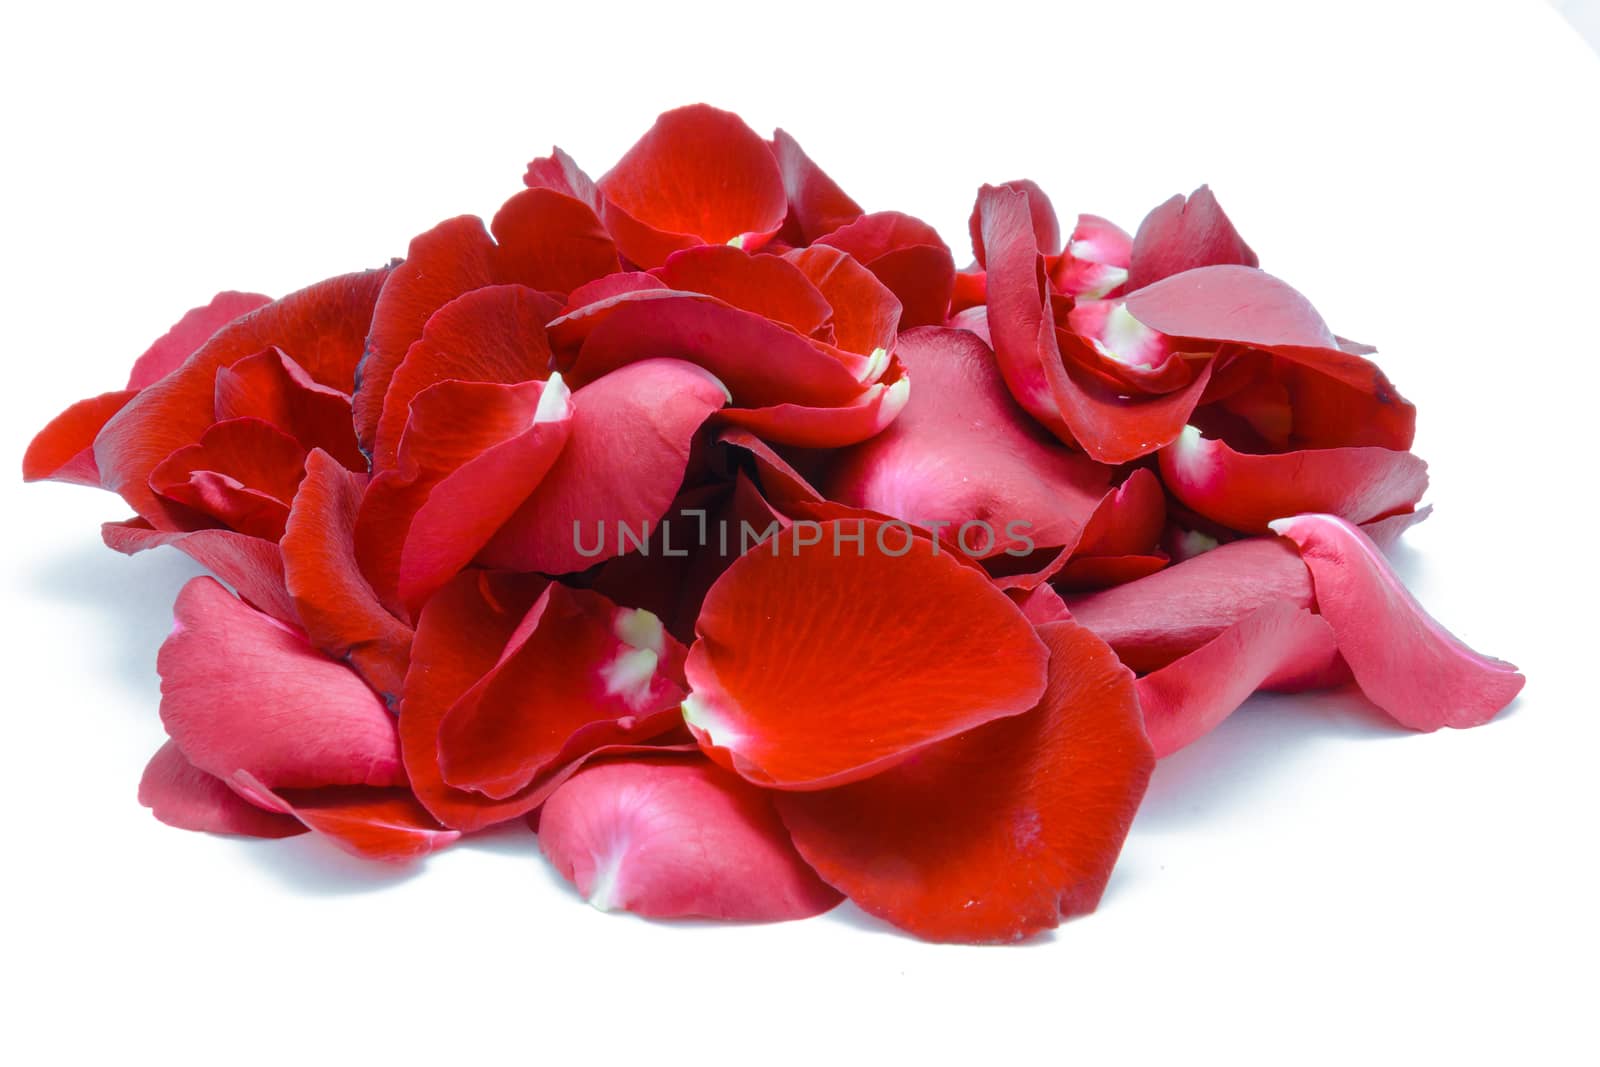 Red rose petal on white background